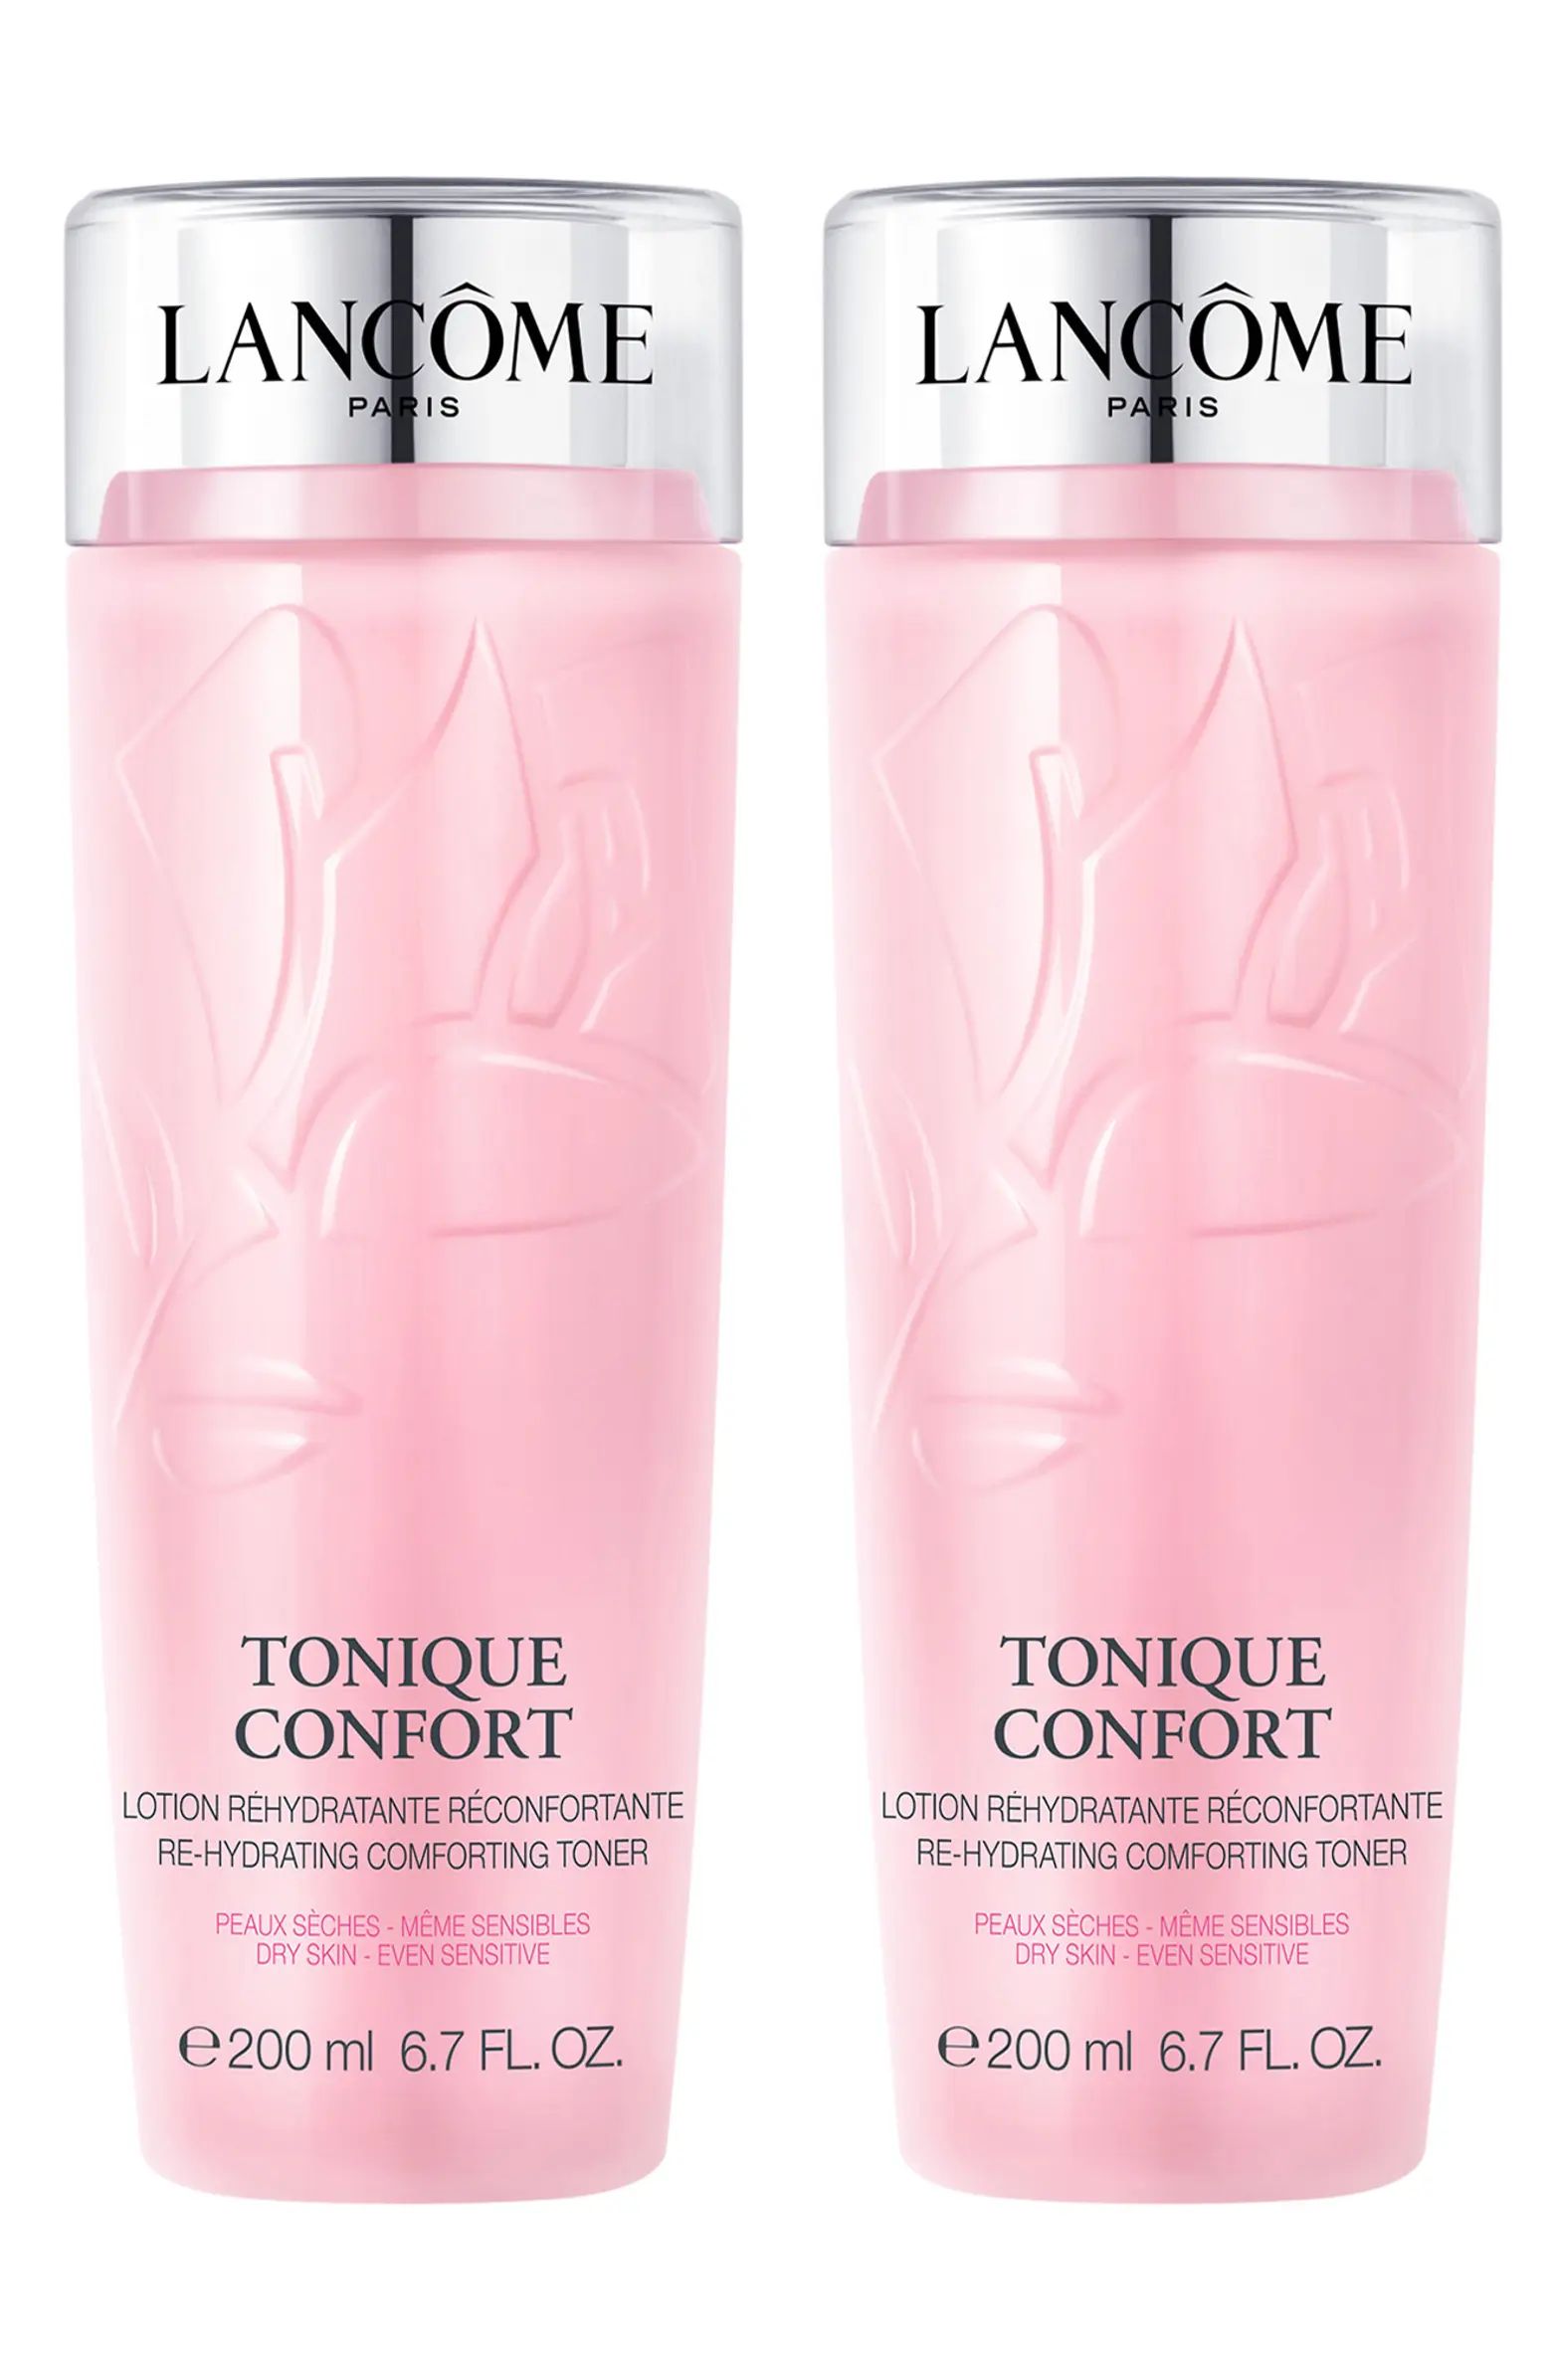 Tonique Confort Comforting Rehydrating Face Toner Duo Set $78 Value | Nordstrom